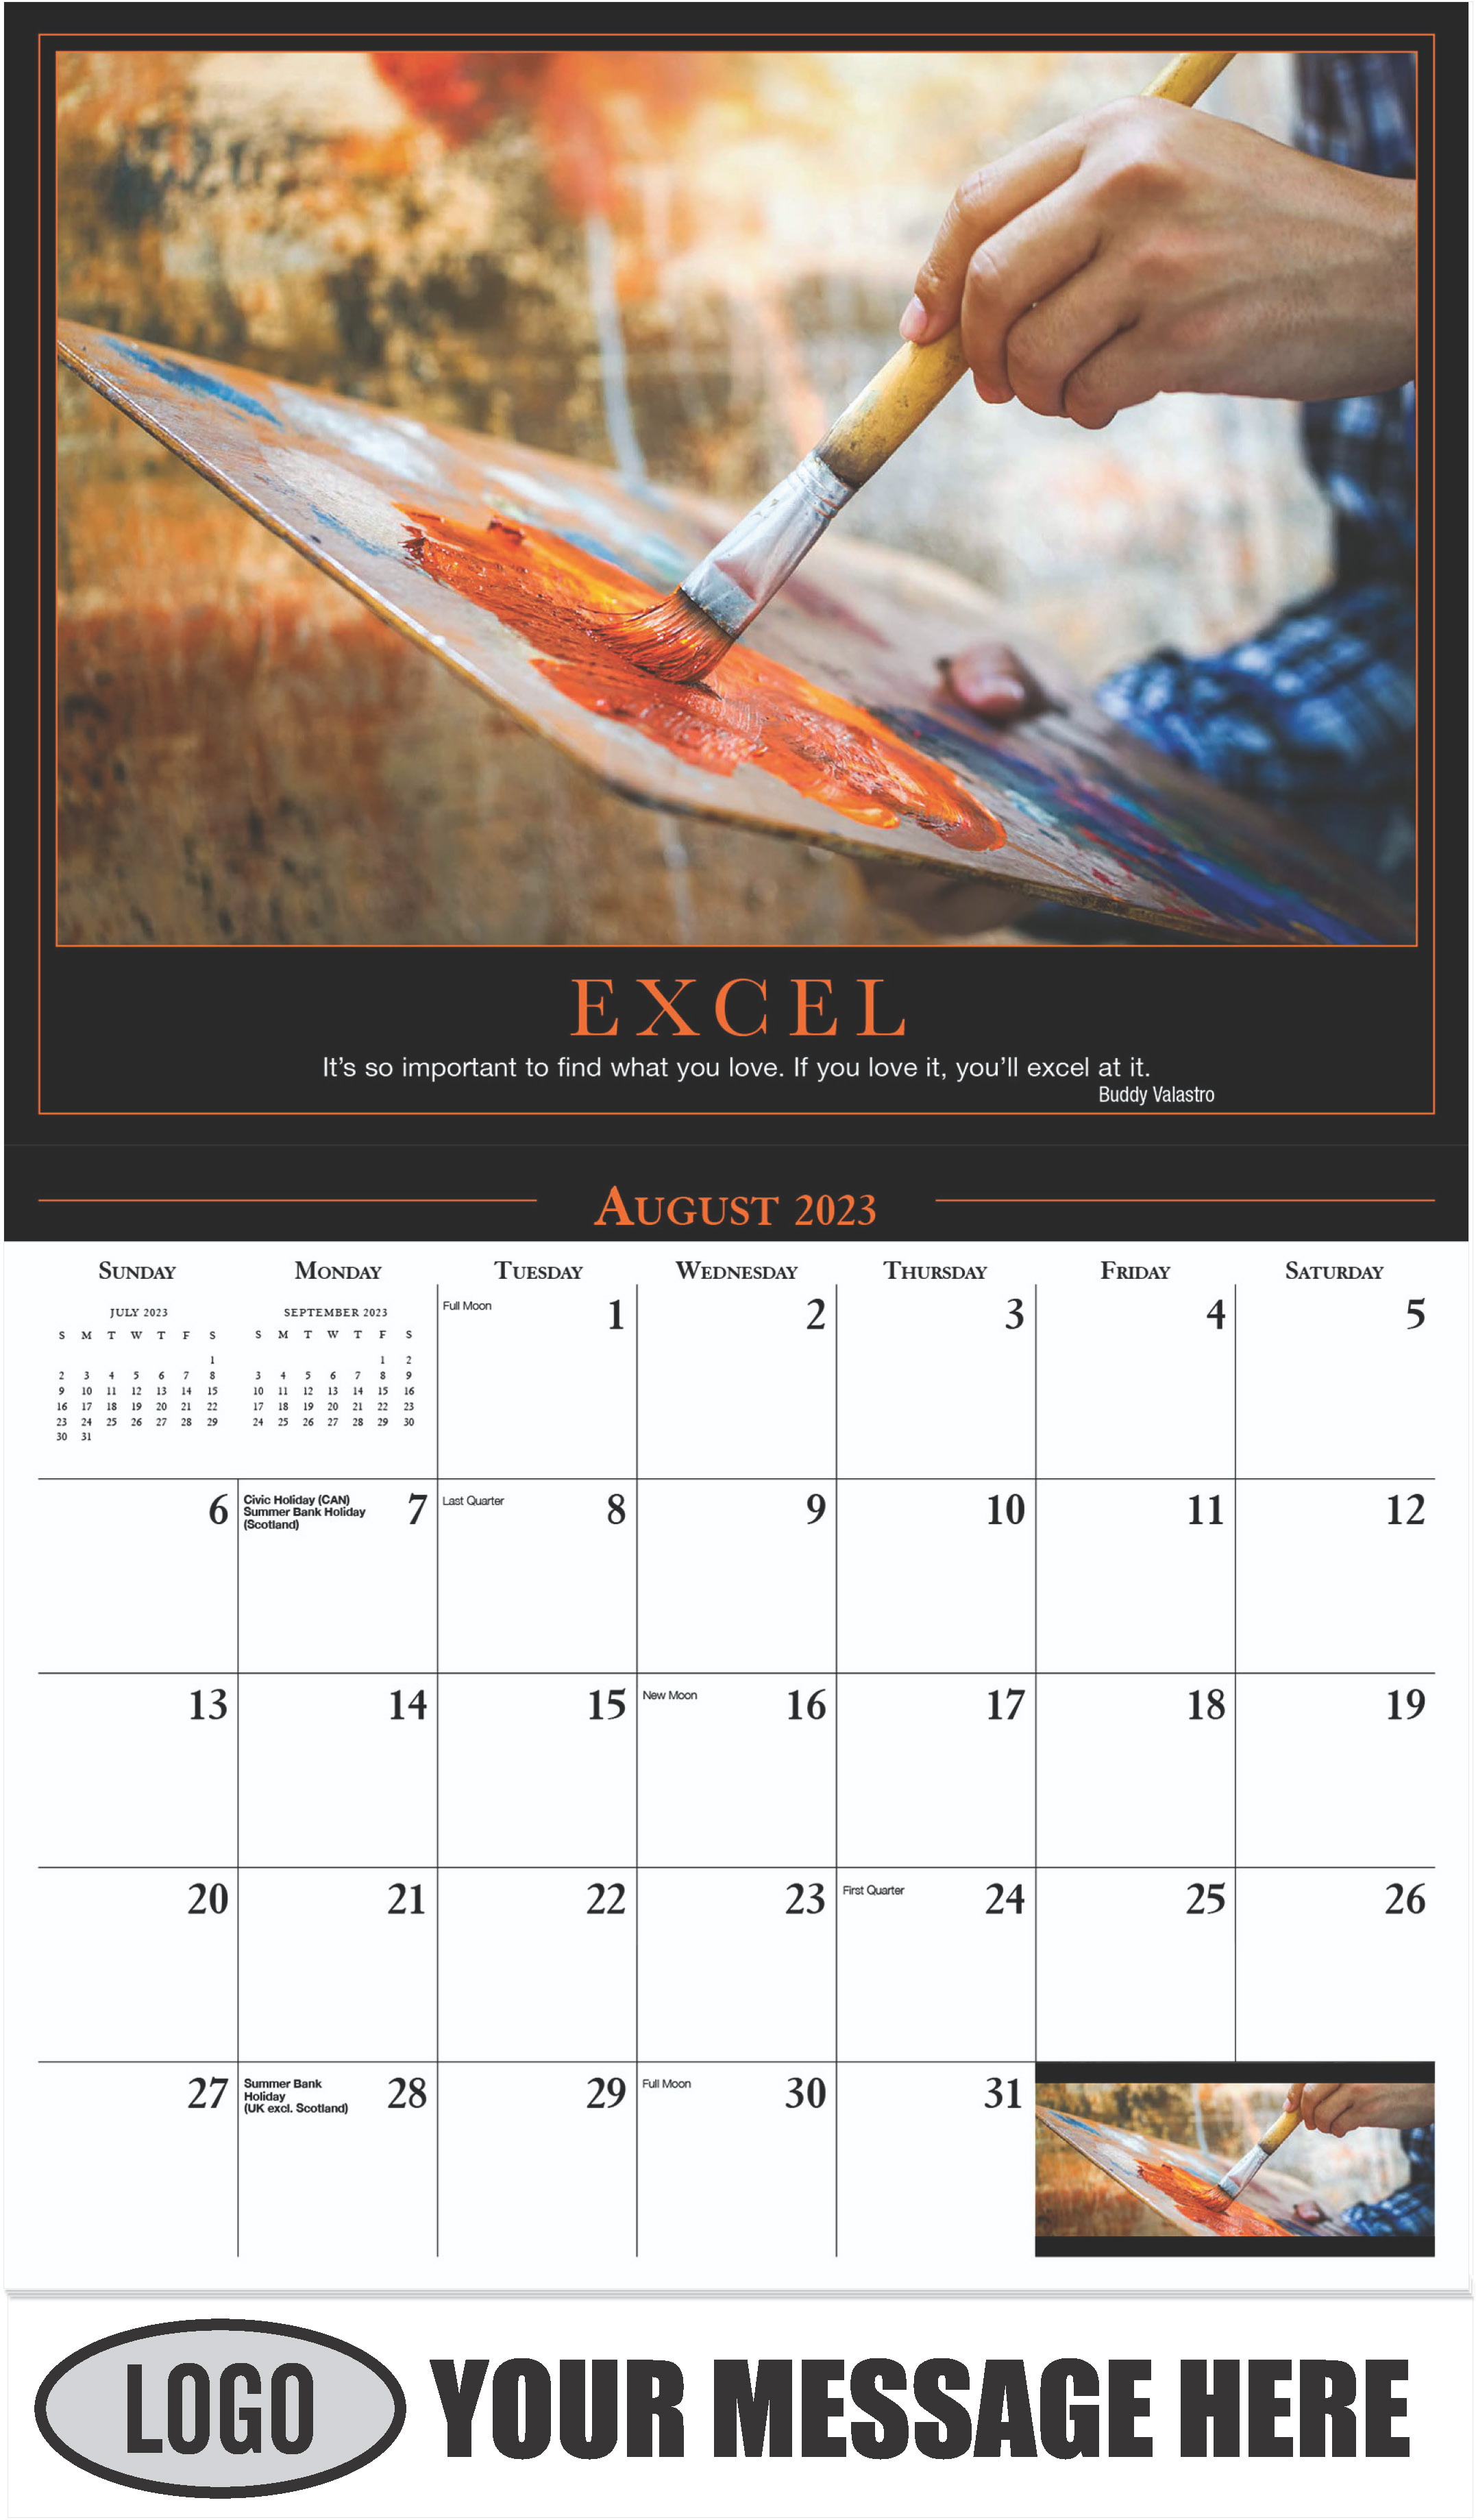 EXCEL ''It's so important to find what you love. If you love it, you'll excel at it.'' - Buddy Valastro - August - Motivation 2023 Promotional Calendar